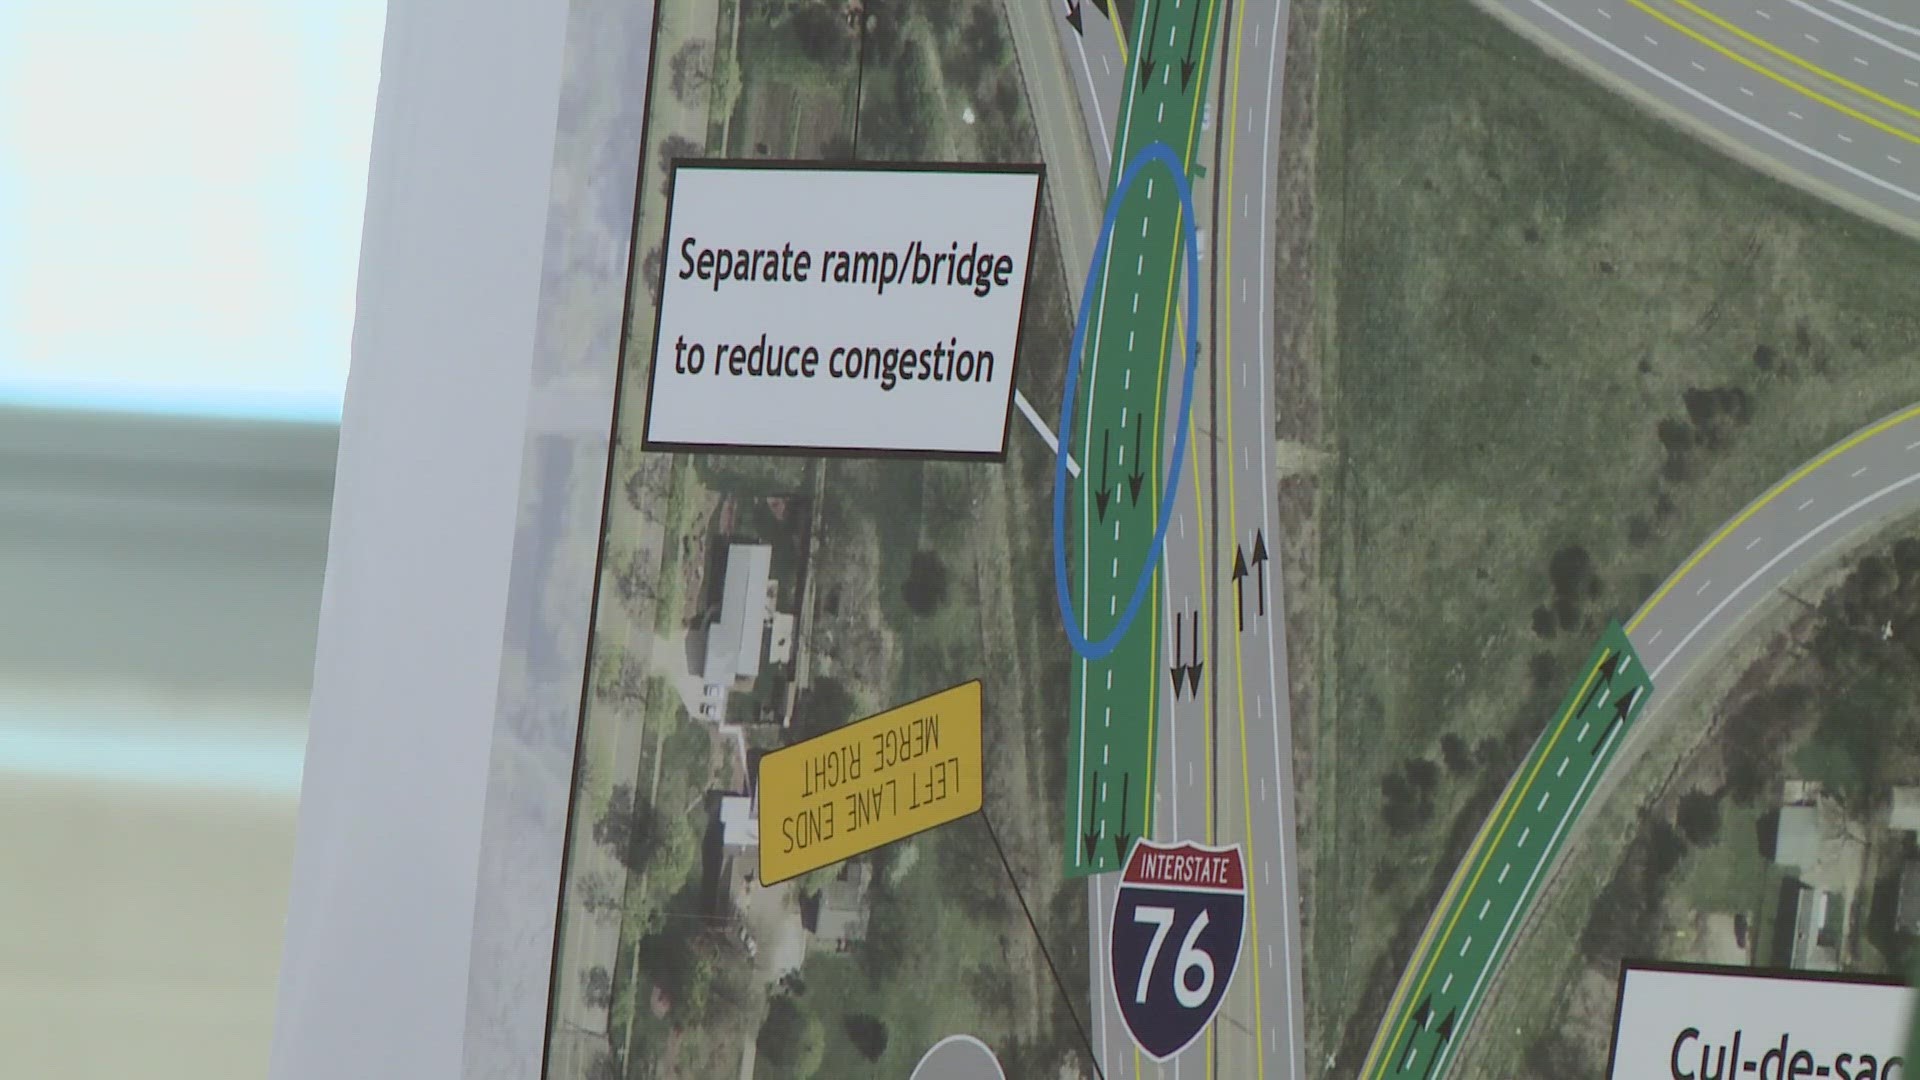 'The proposed project would improve safety, reduce traffic congestion, maintain deteriorating pavement and bridges and modernize the Kenmore Leg,' according to ODOT.